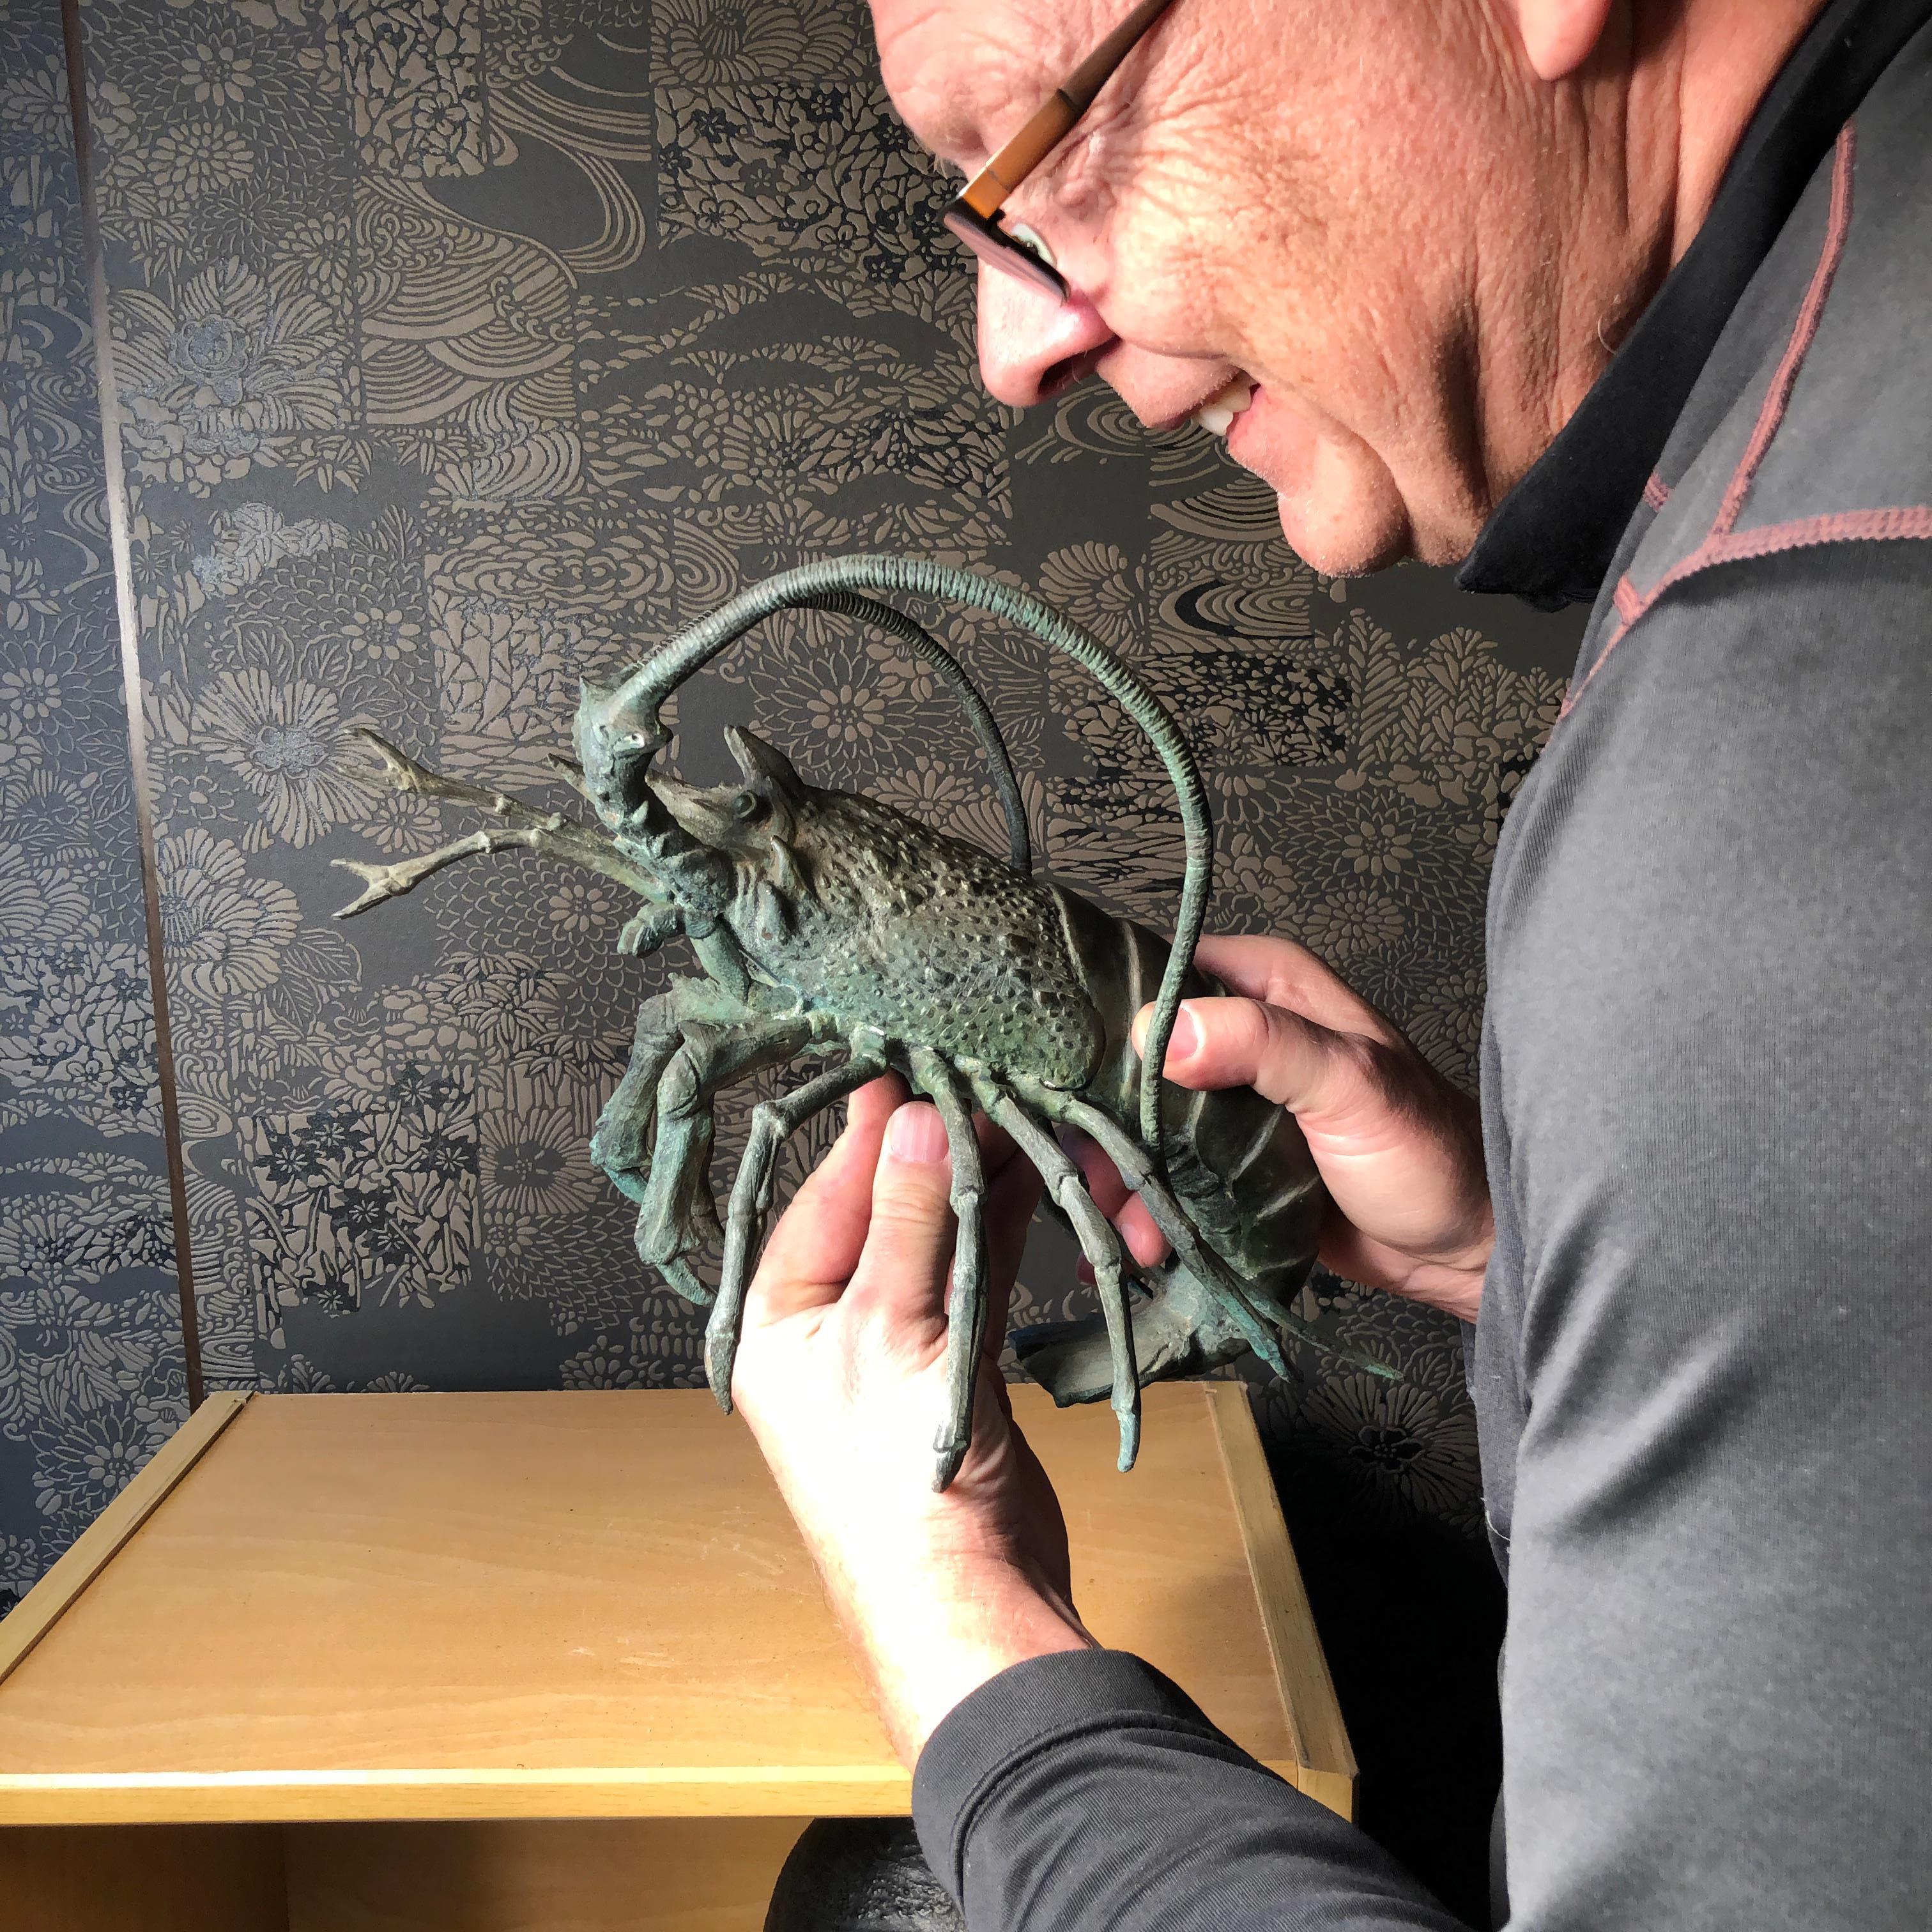 From our recent Japanese acquisitions travels comes this impressive oversized crustacean.

A fine bronze jumbo sculpture okimono of an animated lobster dating to the early 20th century, Taisho period.

Brilliantly conceived with original dark